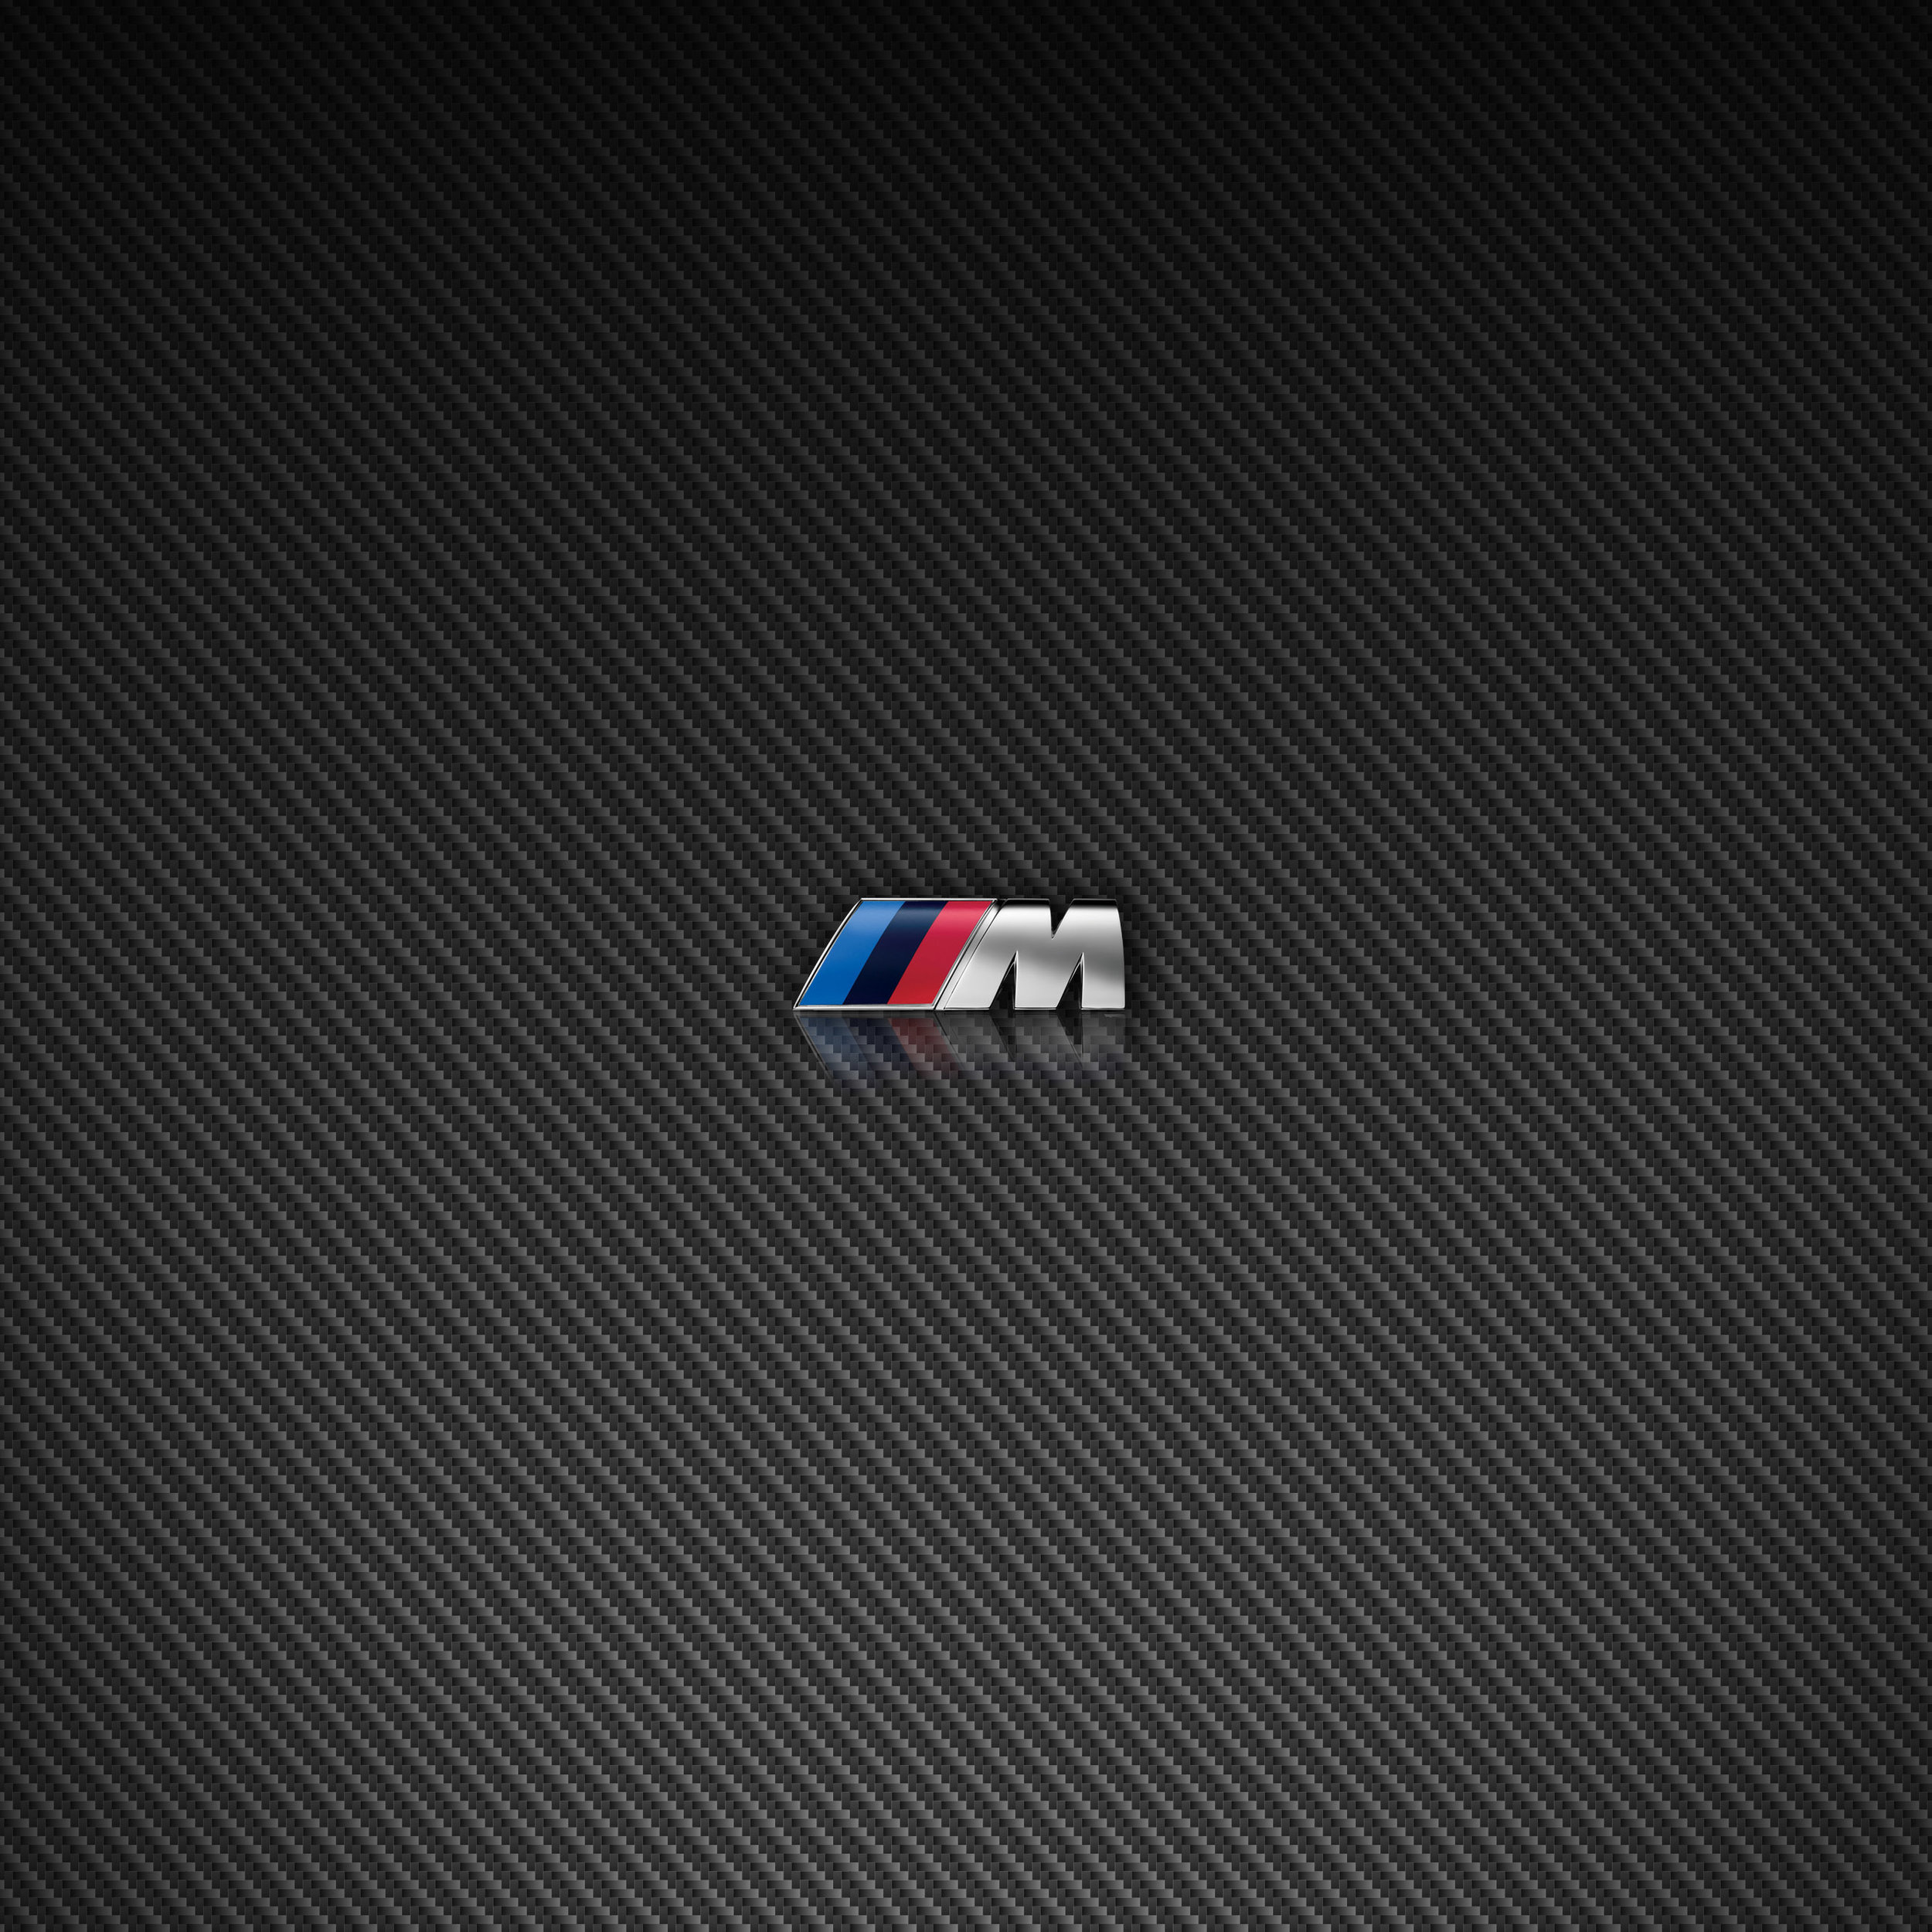 Carbon Fiber Bmw M And Mercedes Amg Wallpapers For Iphone 7 Plus Parallax Effect Ken Loh